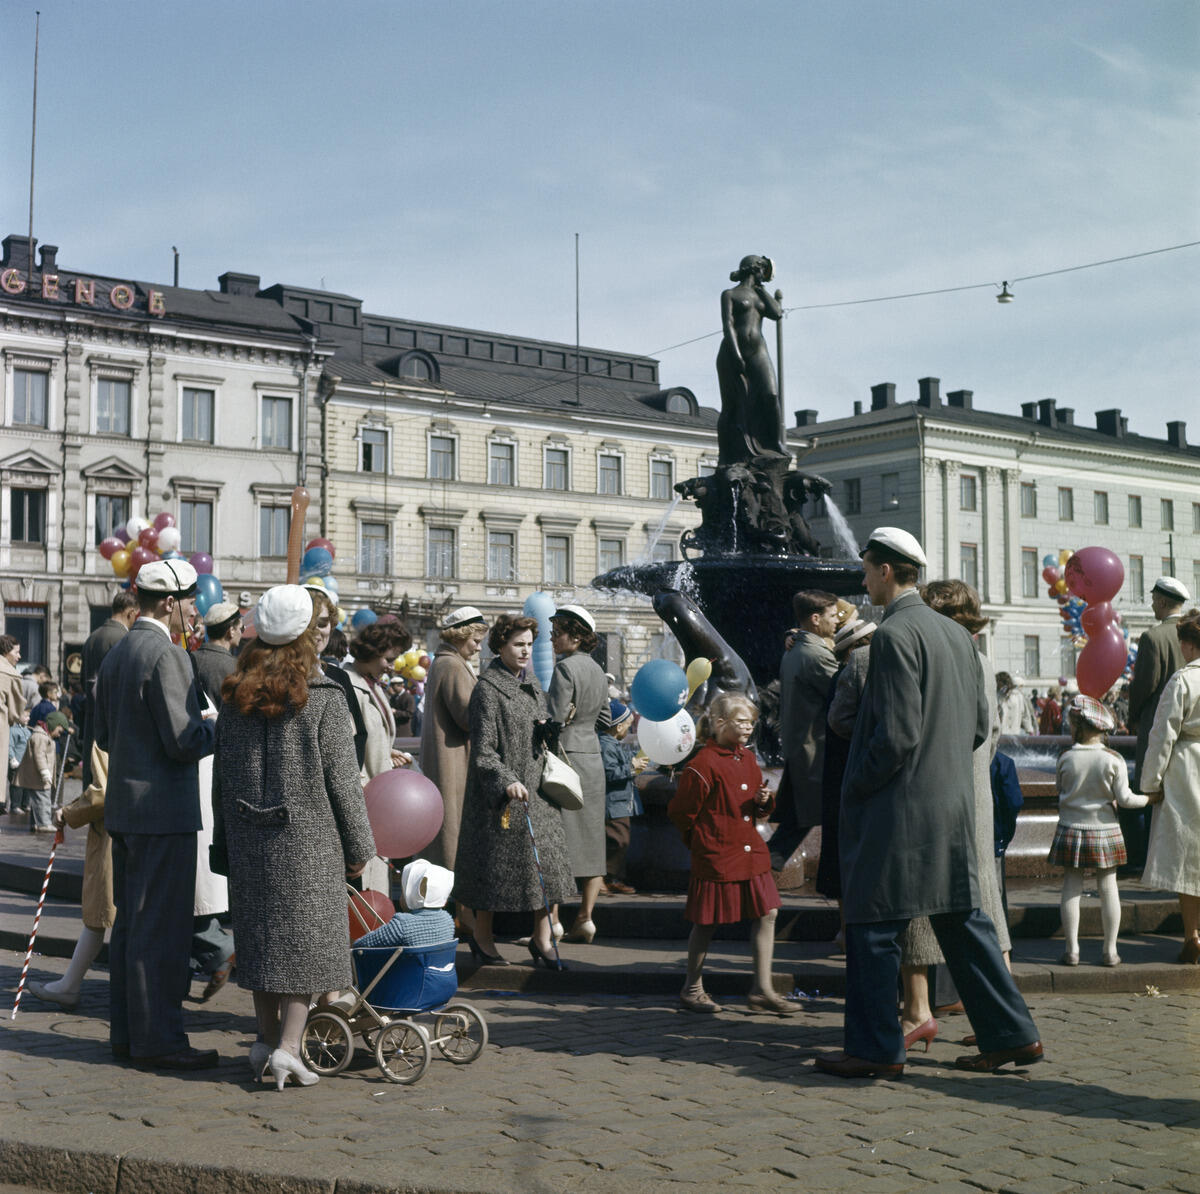 People with balloons gathered around a fountain